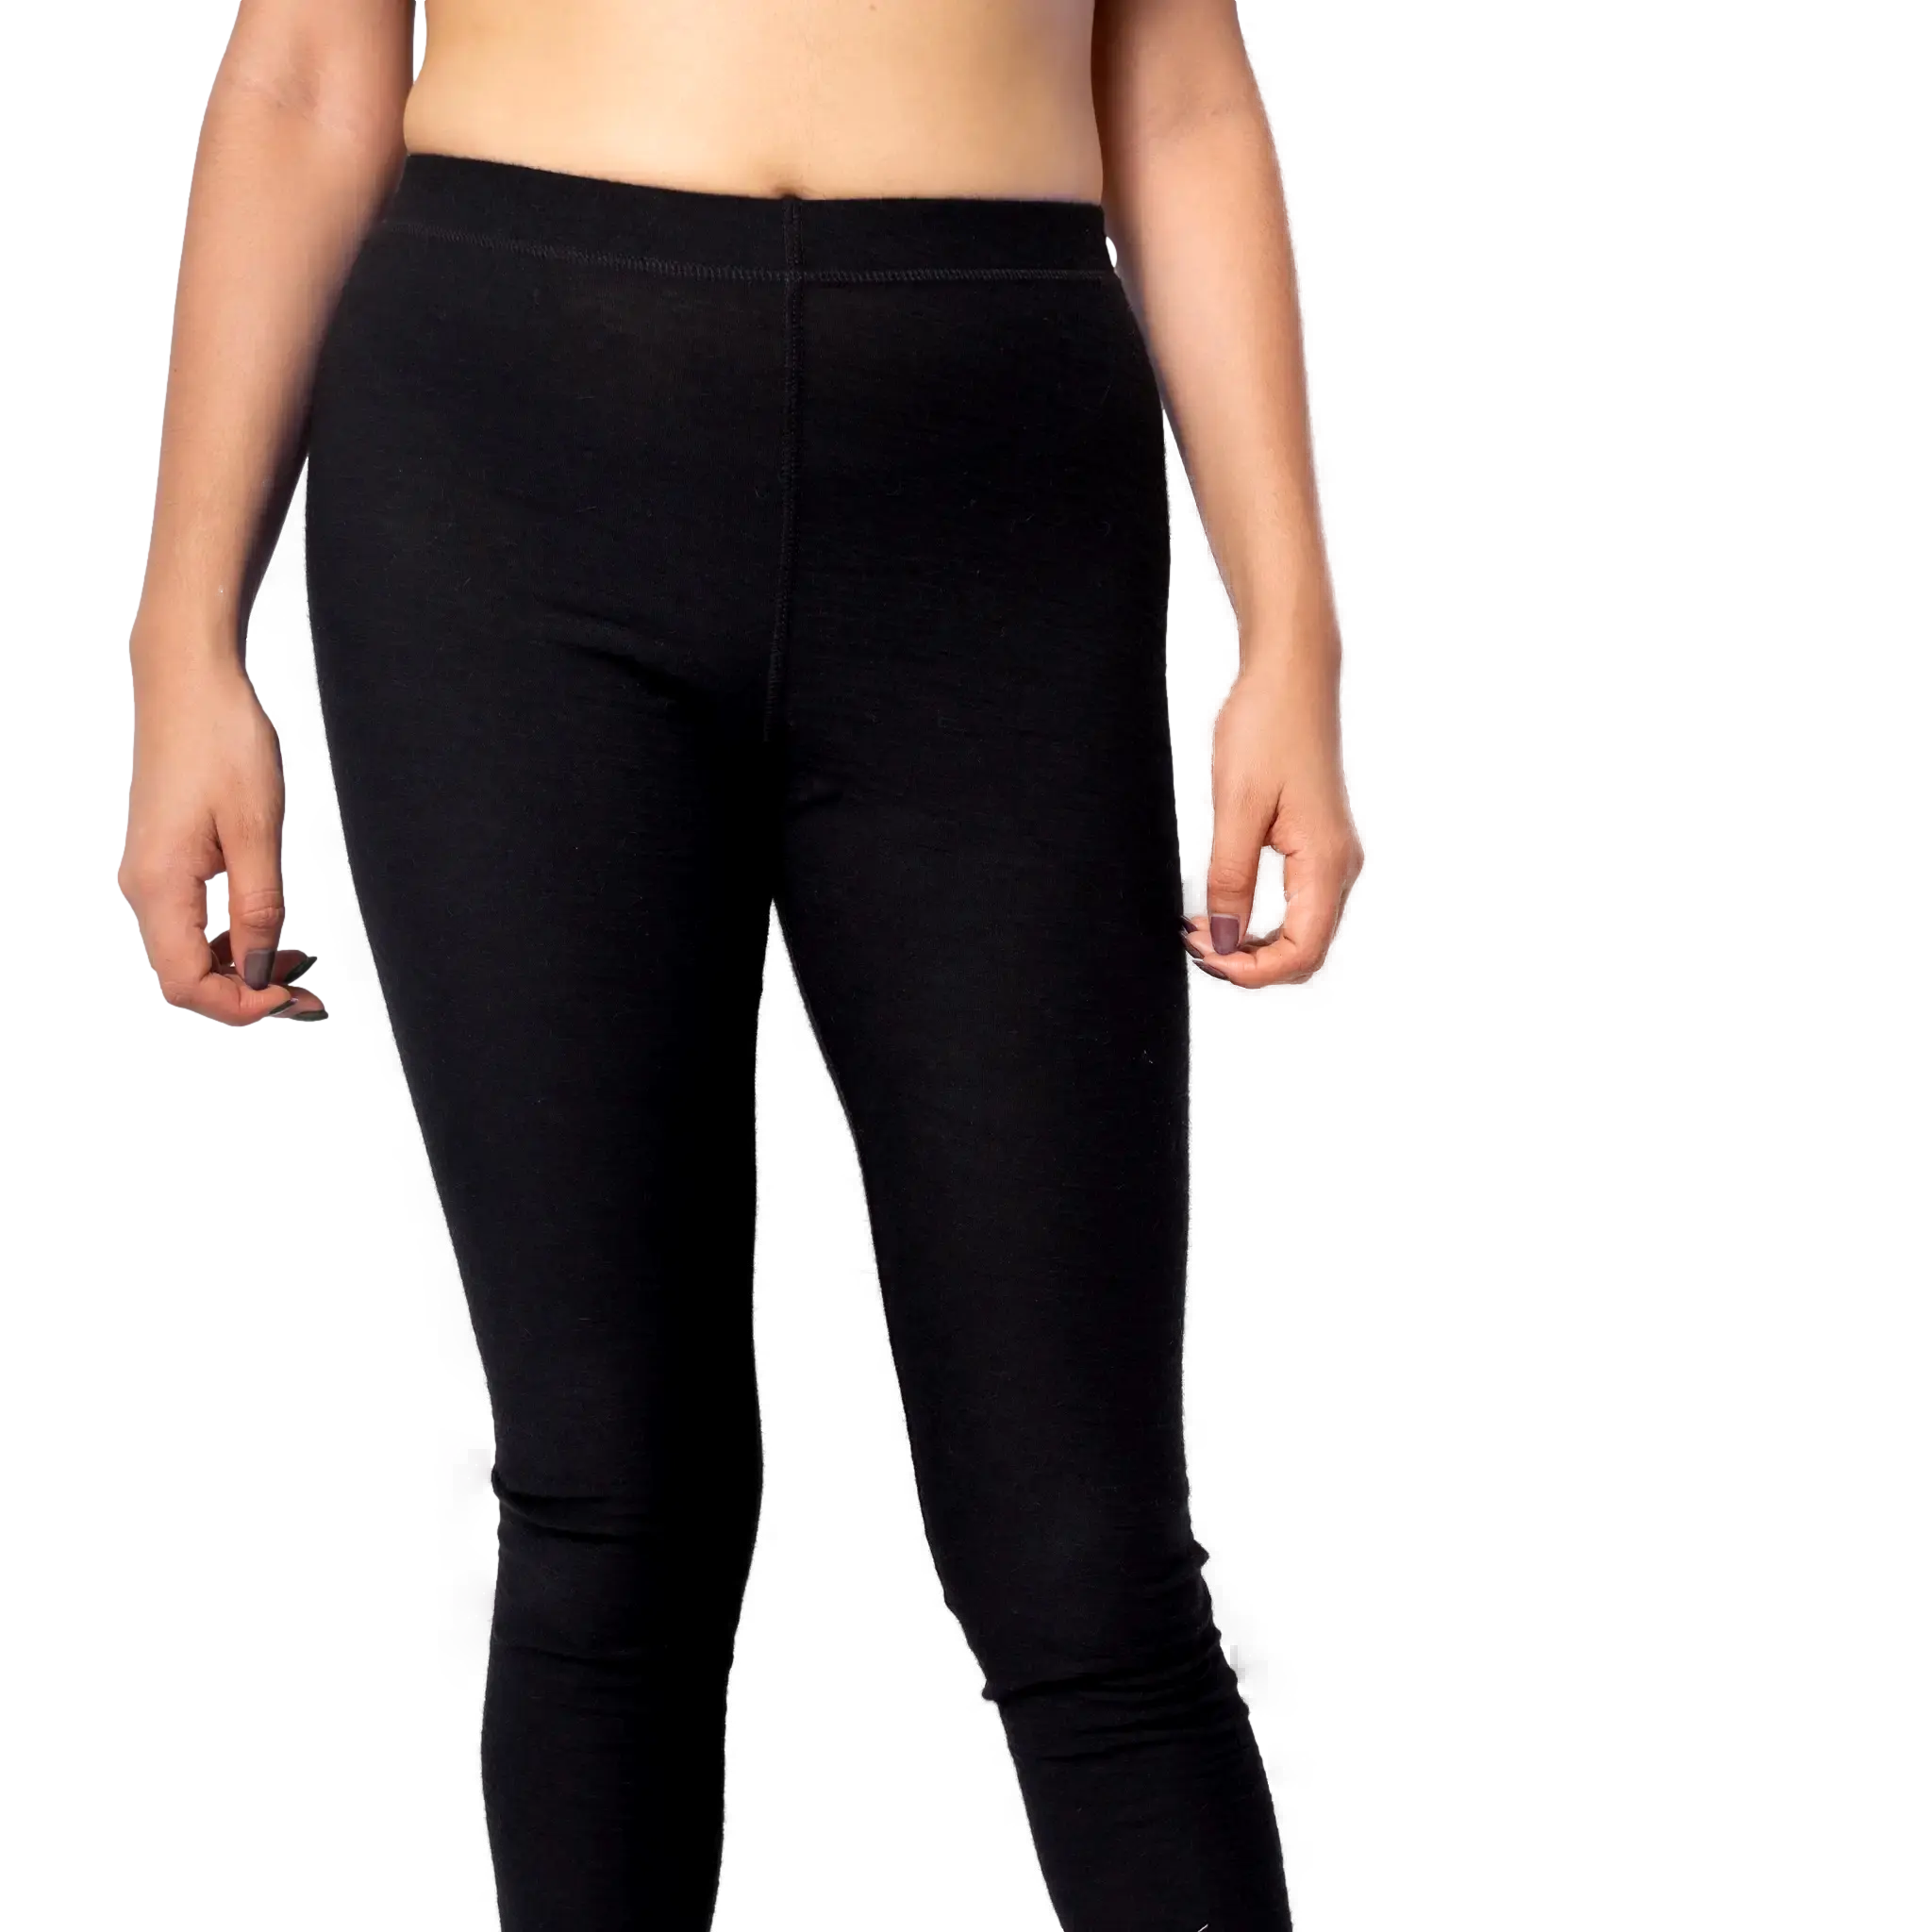 womens-leggings-ultralight160-all-activities-product-page.webp__PID:0383d780-13be-405c-ae4a-d639456521bd